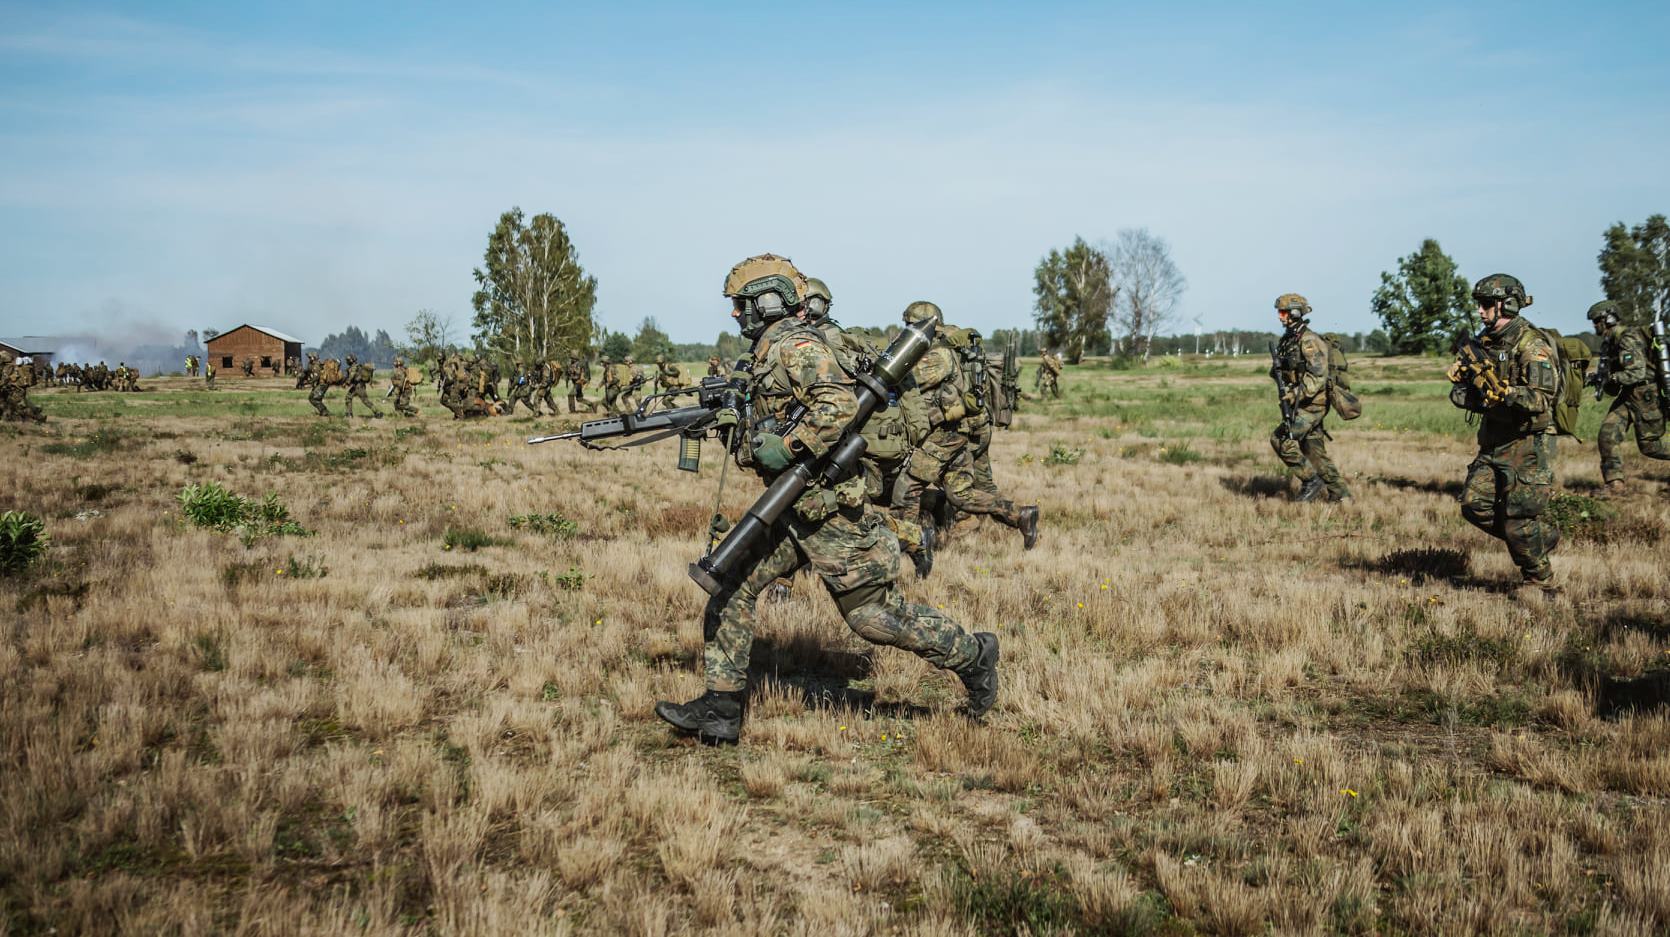 Three new military bases being built in Lithuania - Militarnyi